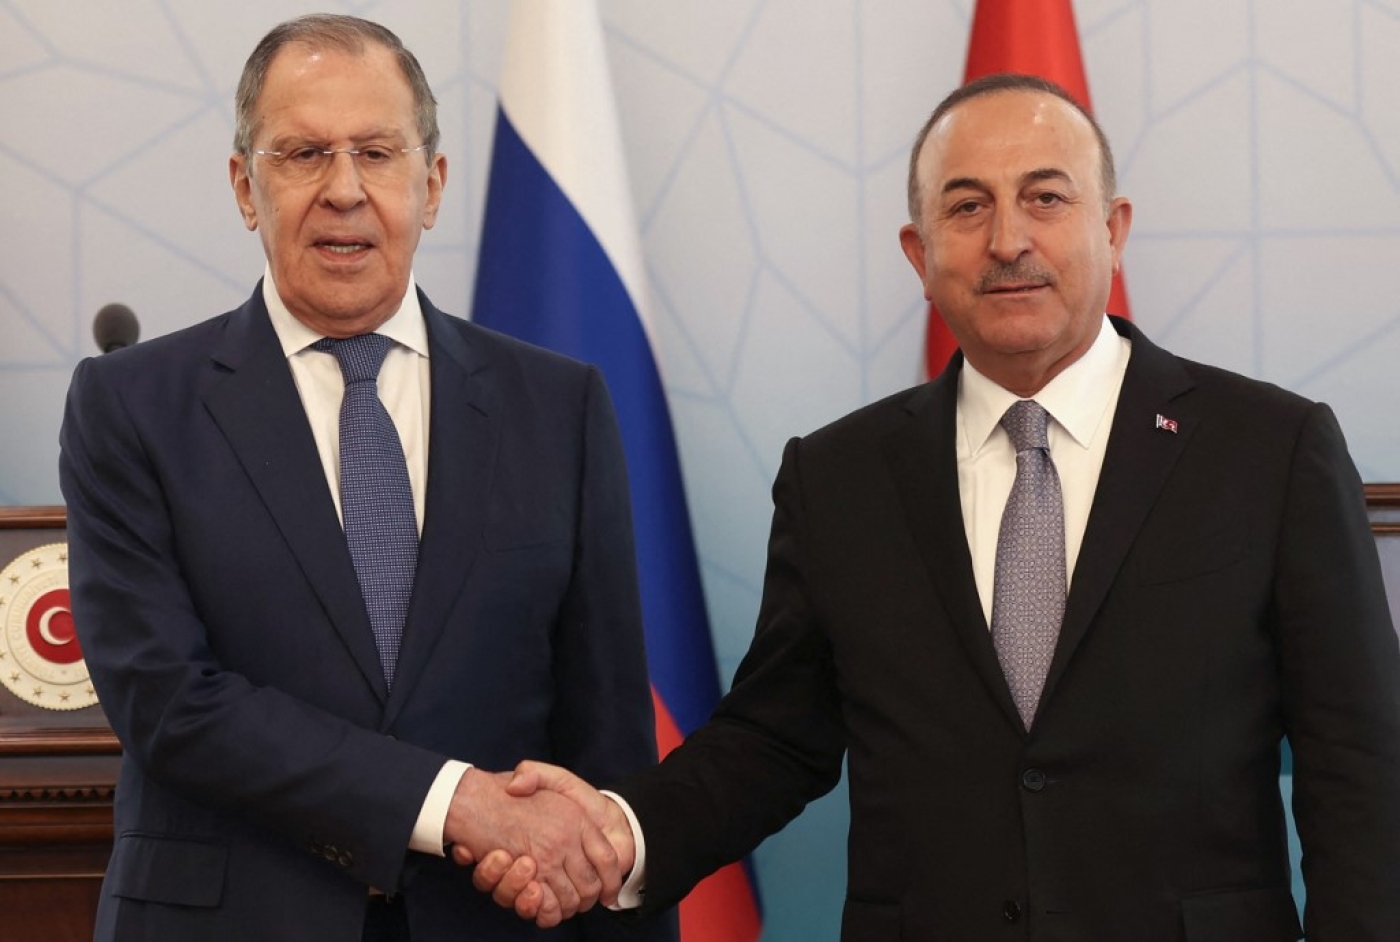 Russian Foreign Minister Sergei Lavrov (L) and Turkish Foreign Minister Mevlut Cavusoglu (R) shake hands after a news conference in Ankara, on 8 June 2022 (AFP)